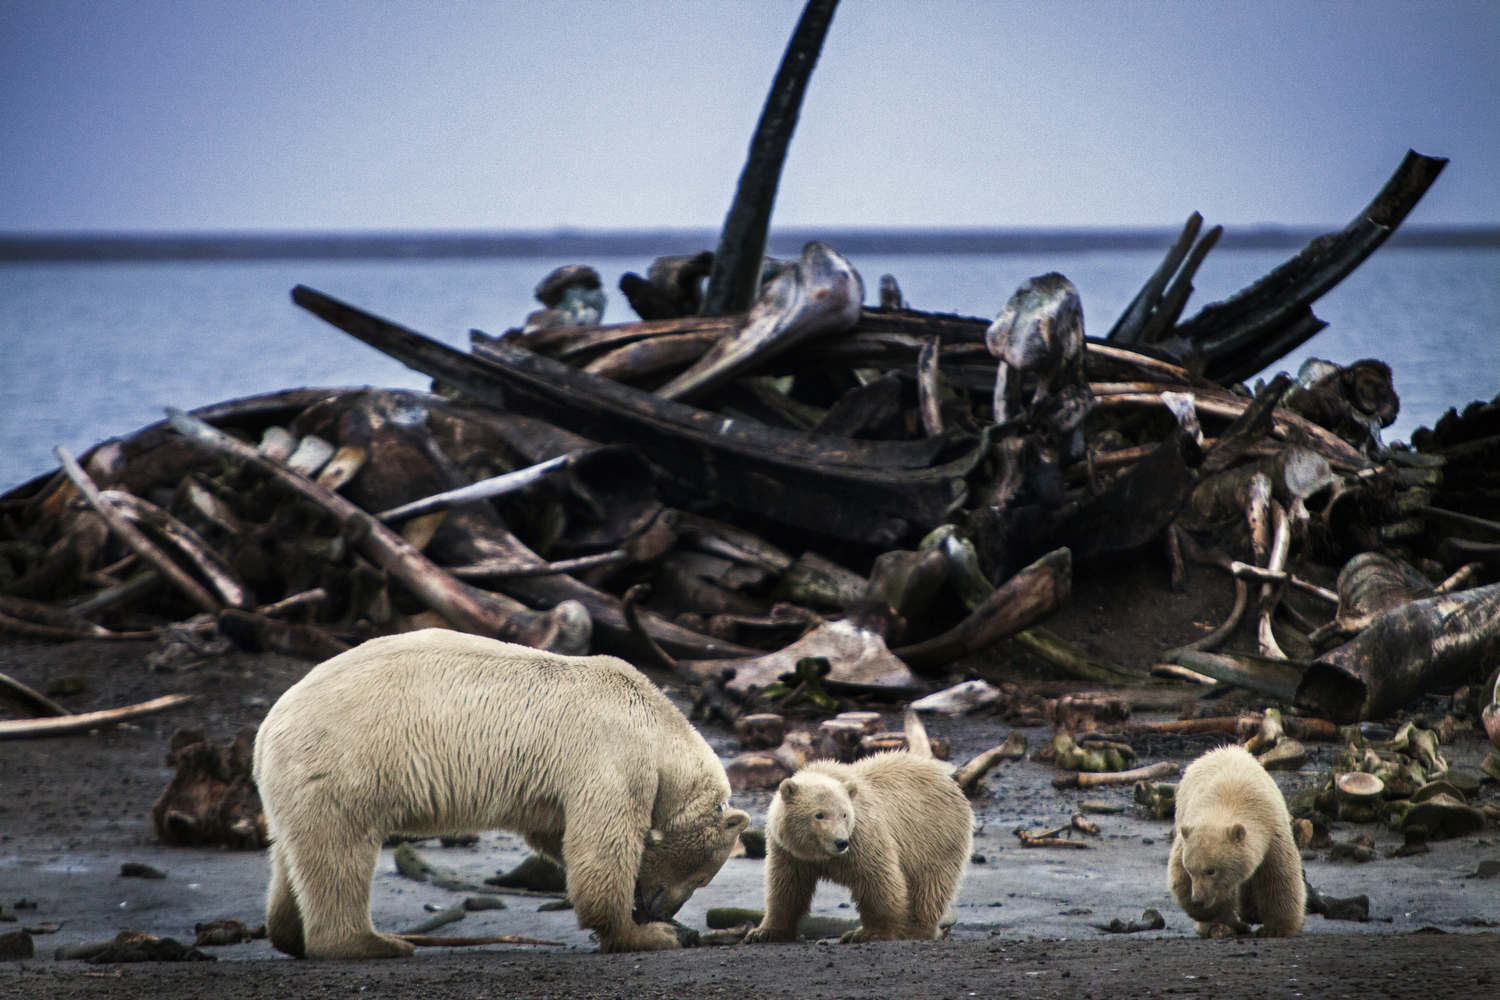 In late September polar bears flock to the native town of Kaktovik in the Alaskan Arctic to eat at "the boneyard": the remains of whales annually hunted by the community.